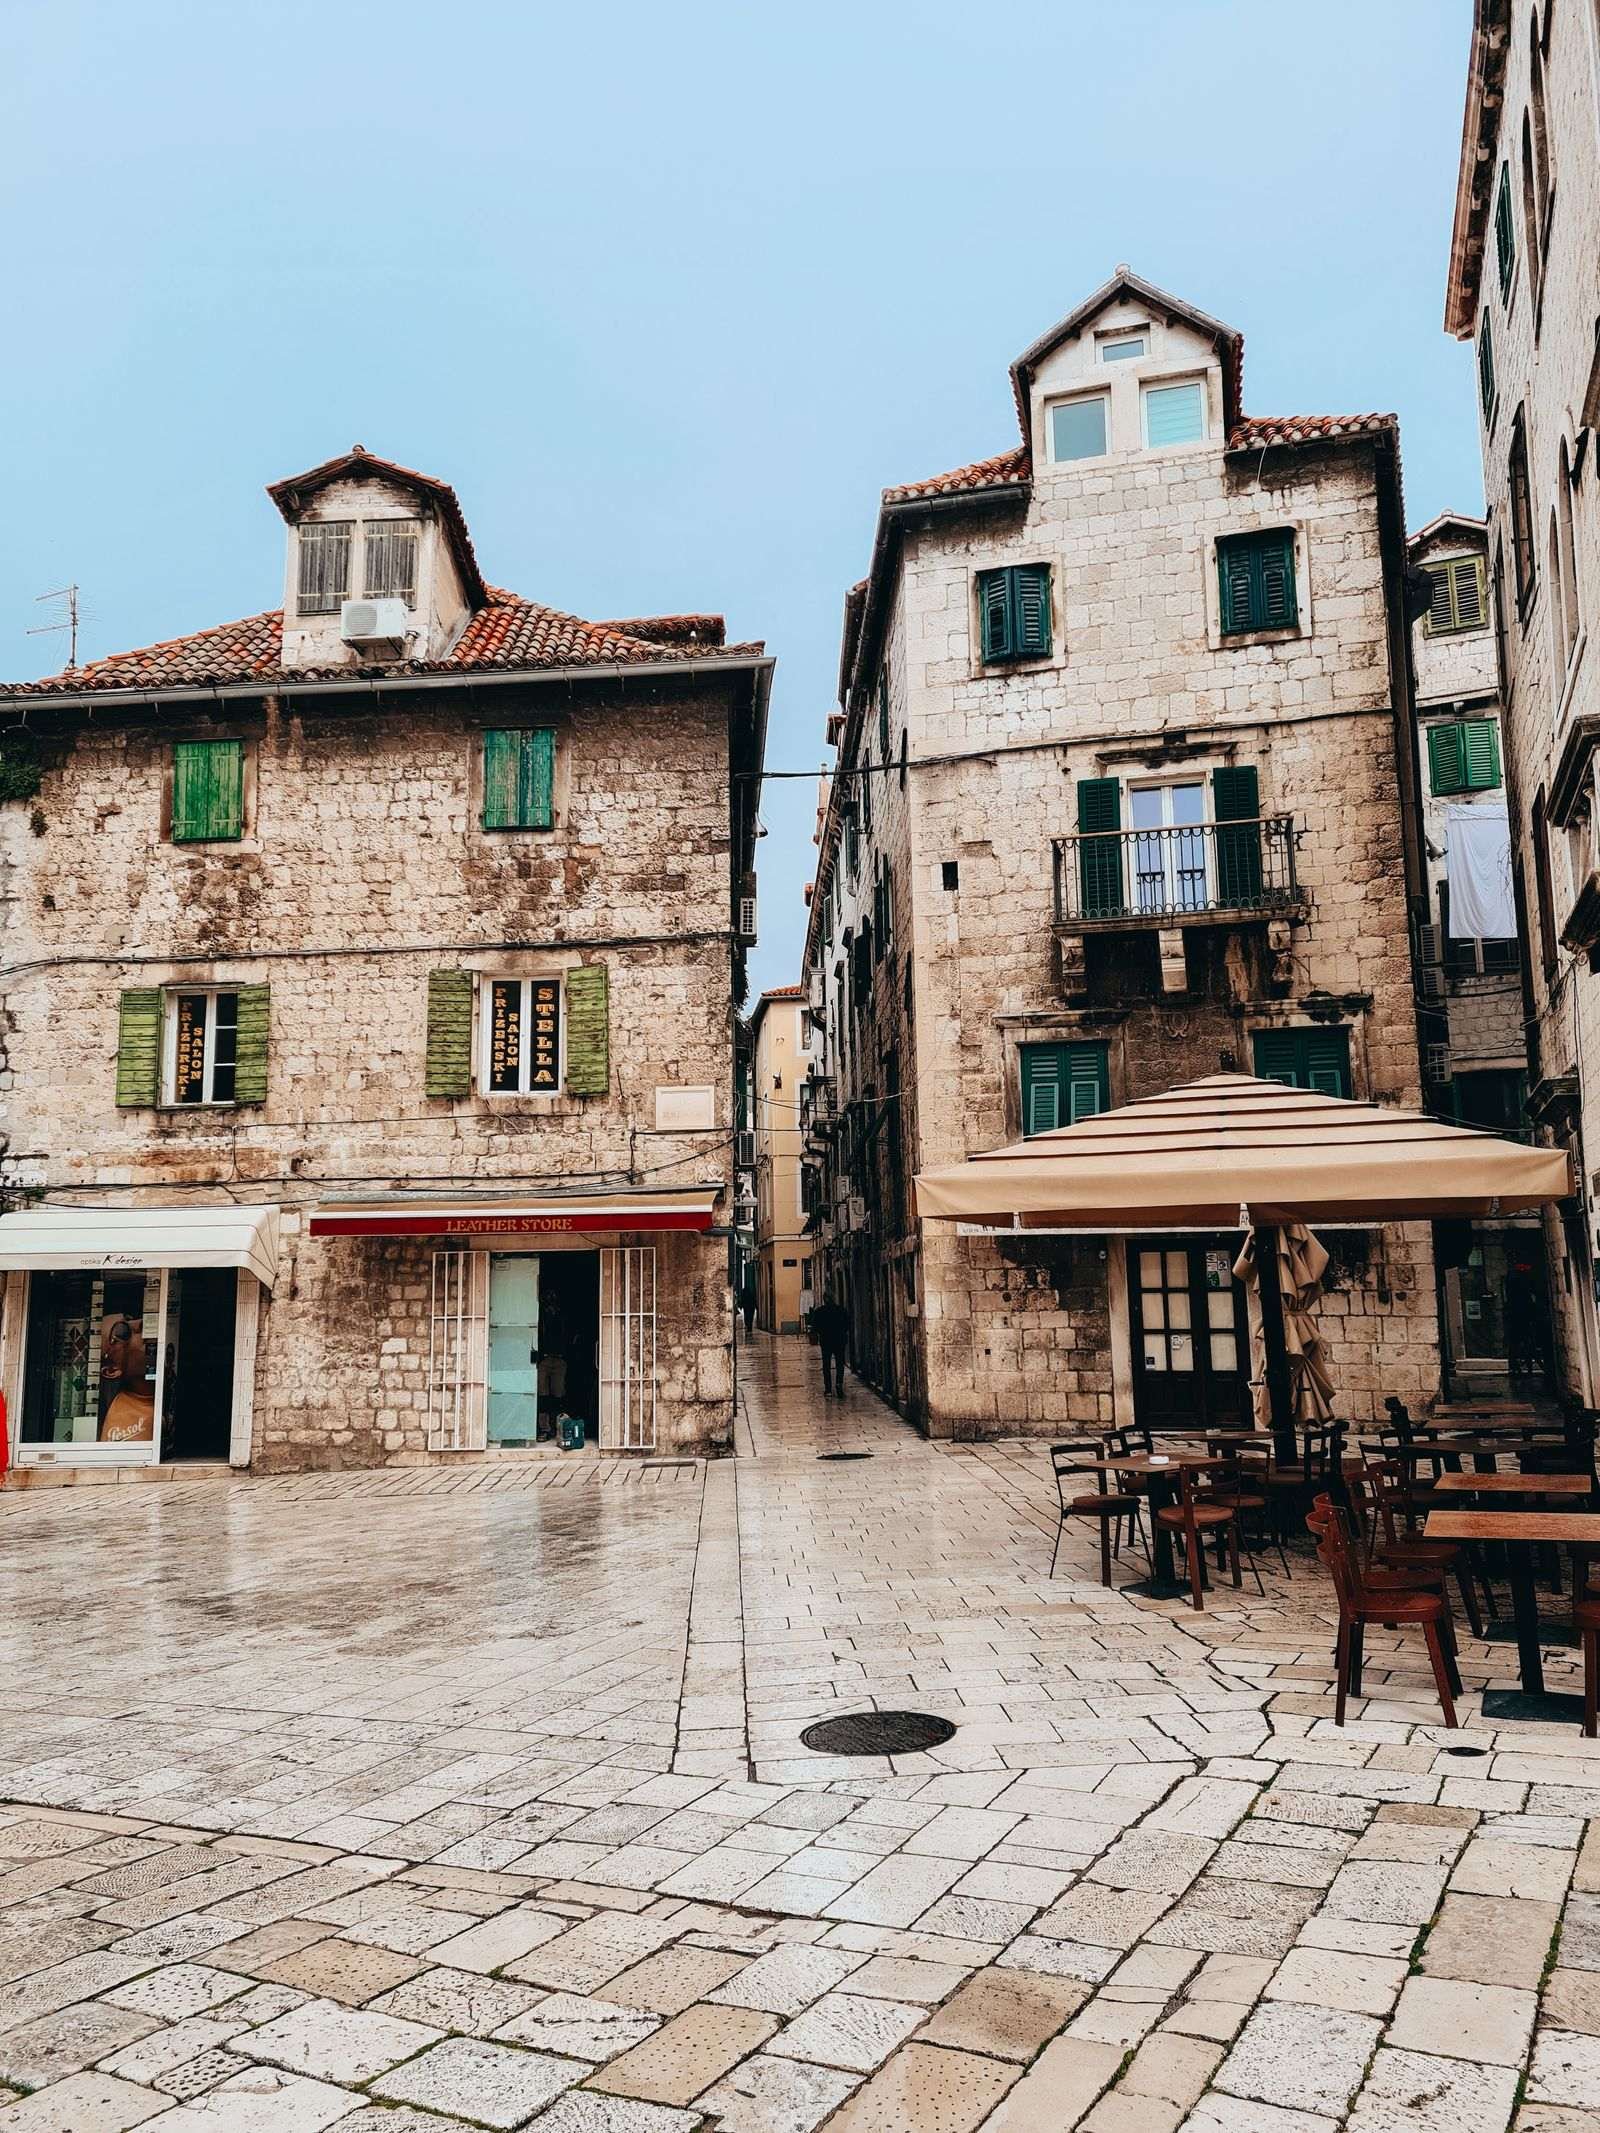 Two old stone buildings with green shutters and an alleyway between the two. The ground is cobbled. In the old town of Split, Croatia